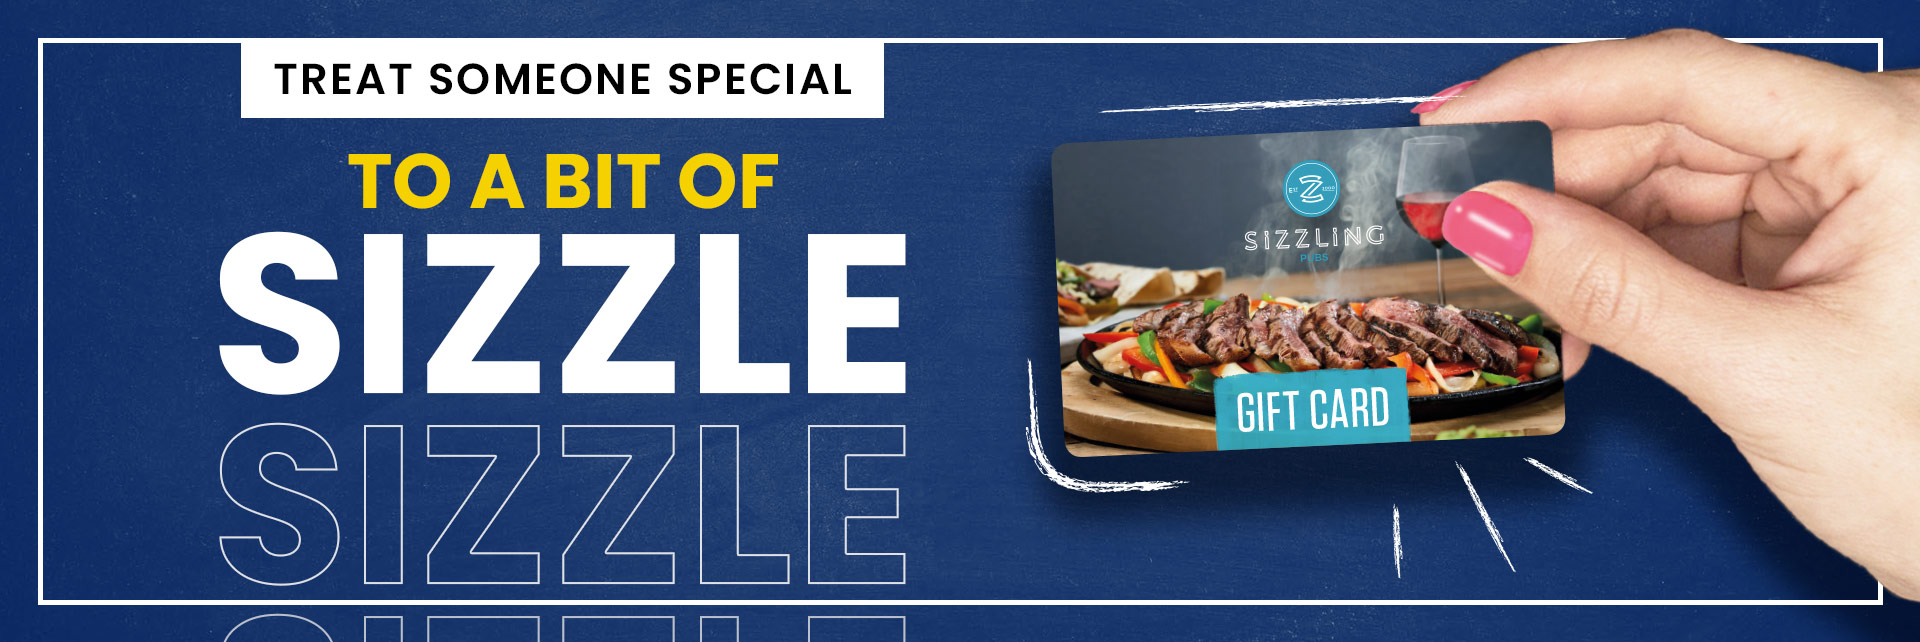 Sizzling Pubs Gift Card at Red Lion, Bedford  in Bedford